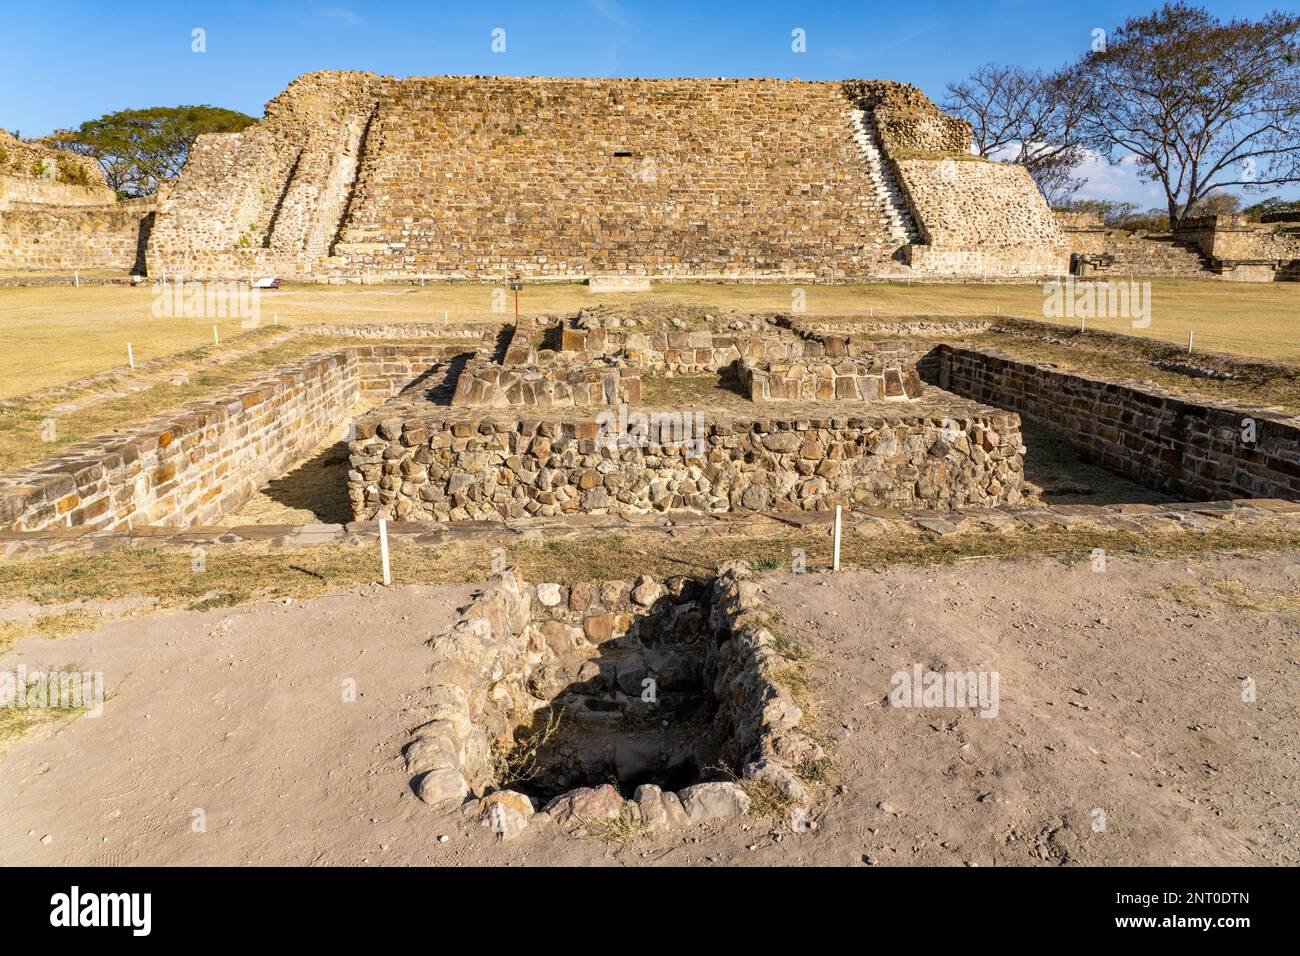 The Adoratorio with the opeing of tunnel in front in the pre-Hispanic Zapotec ruins of Monte Alban in Oaxaca, Mexico.  Building P is in the background Stock Photo